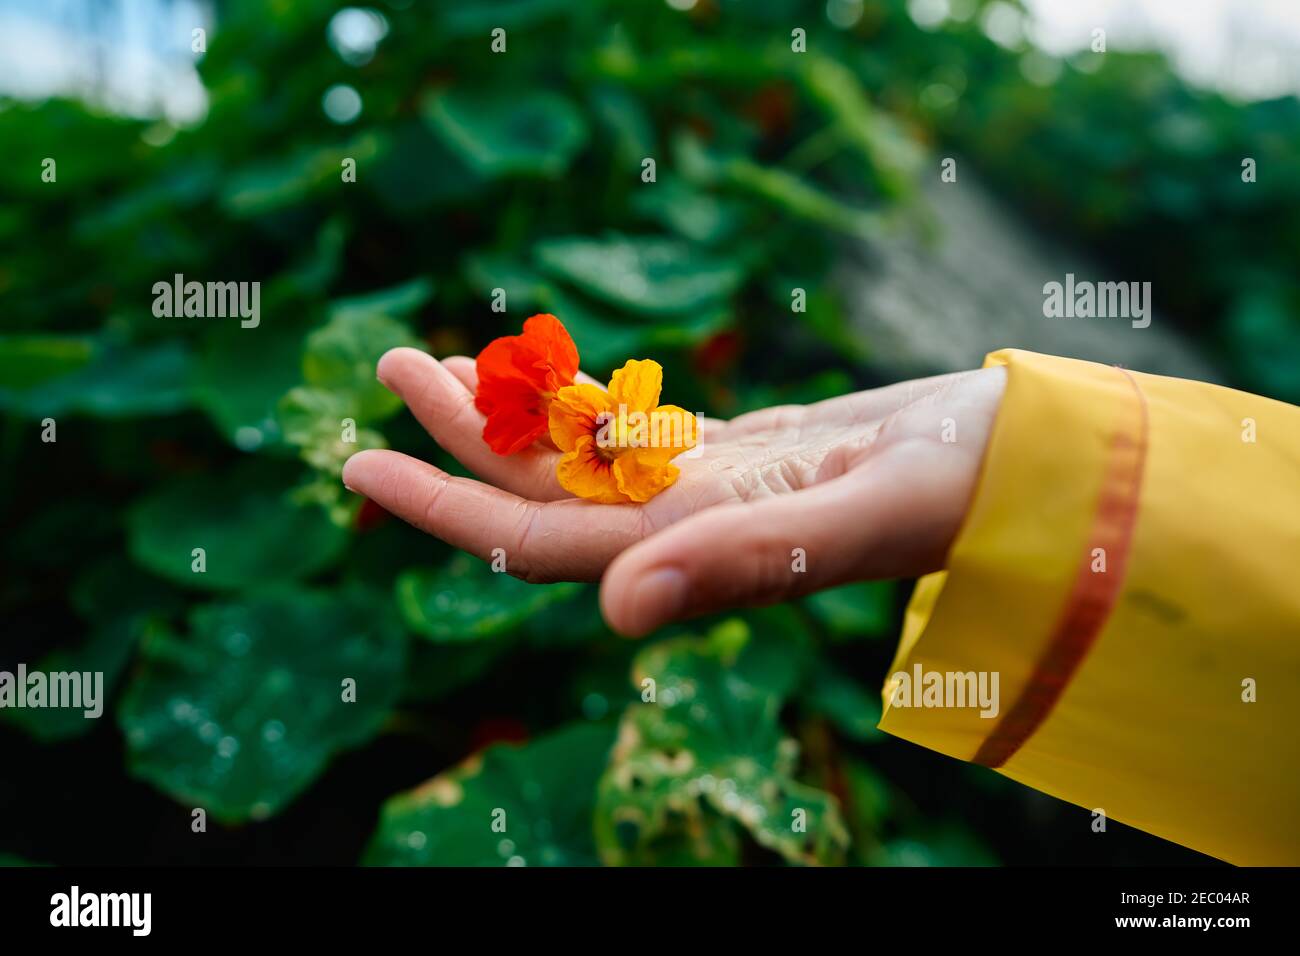 The hand of a young woman holding a flower in the rain Stock Photo